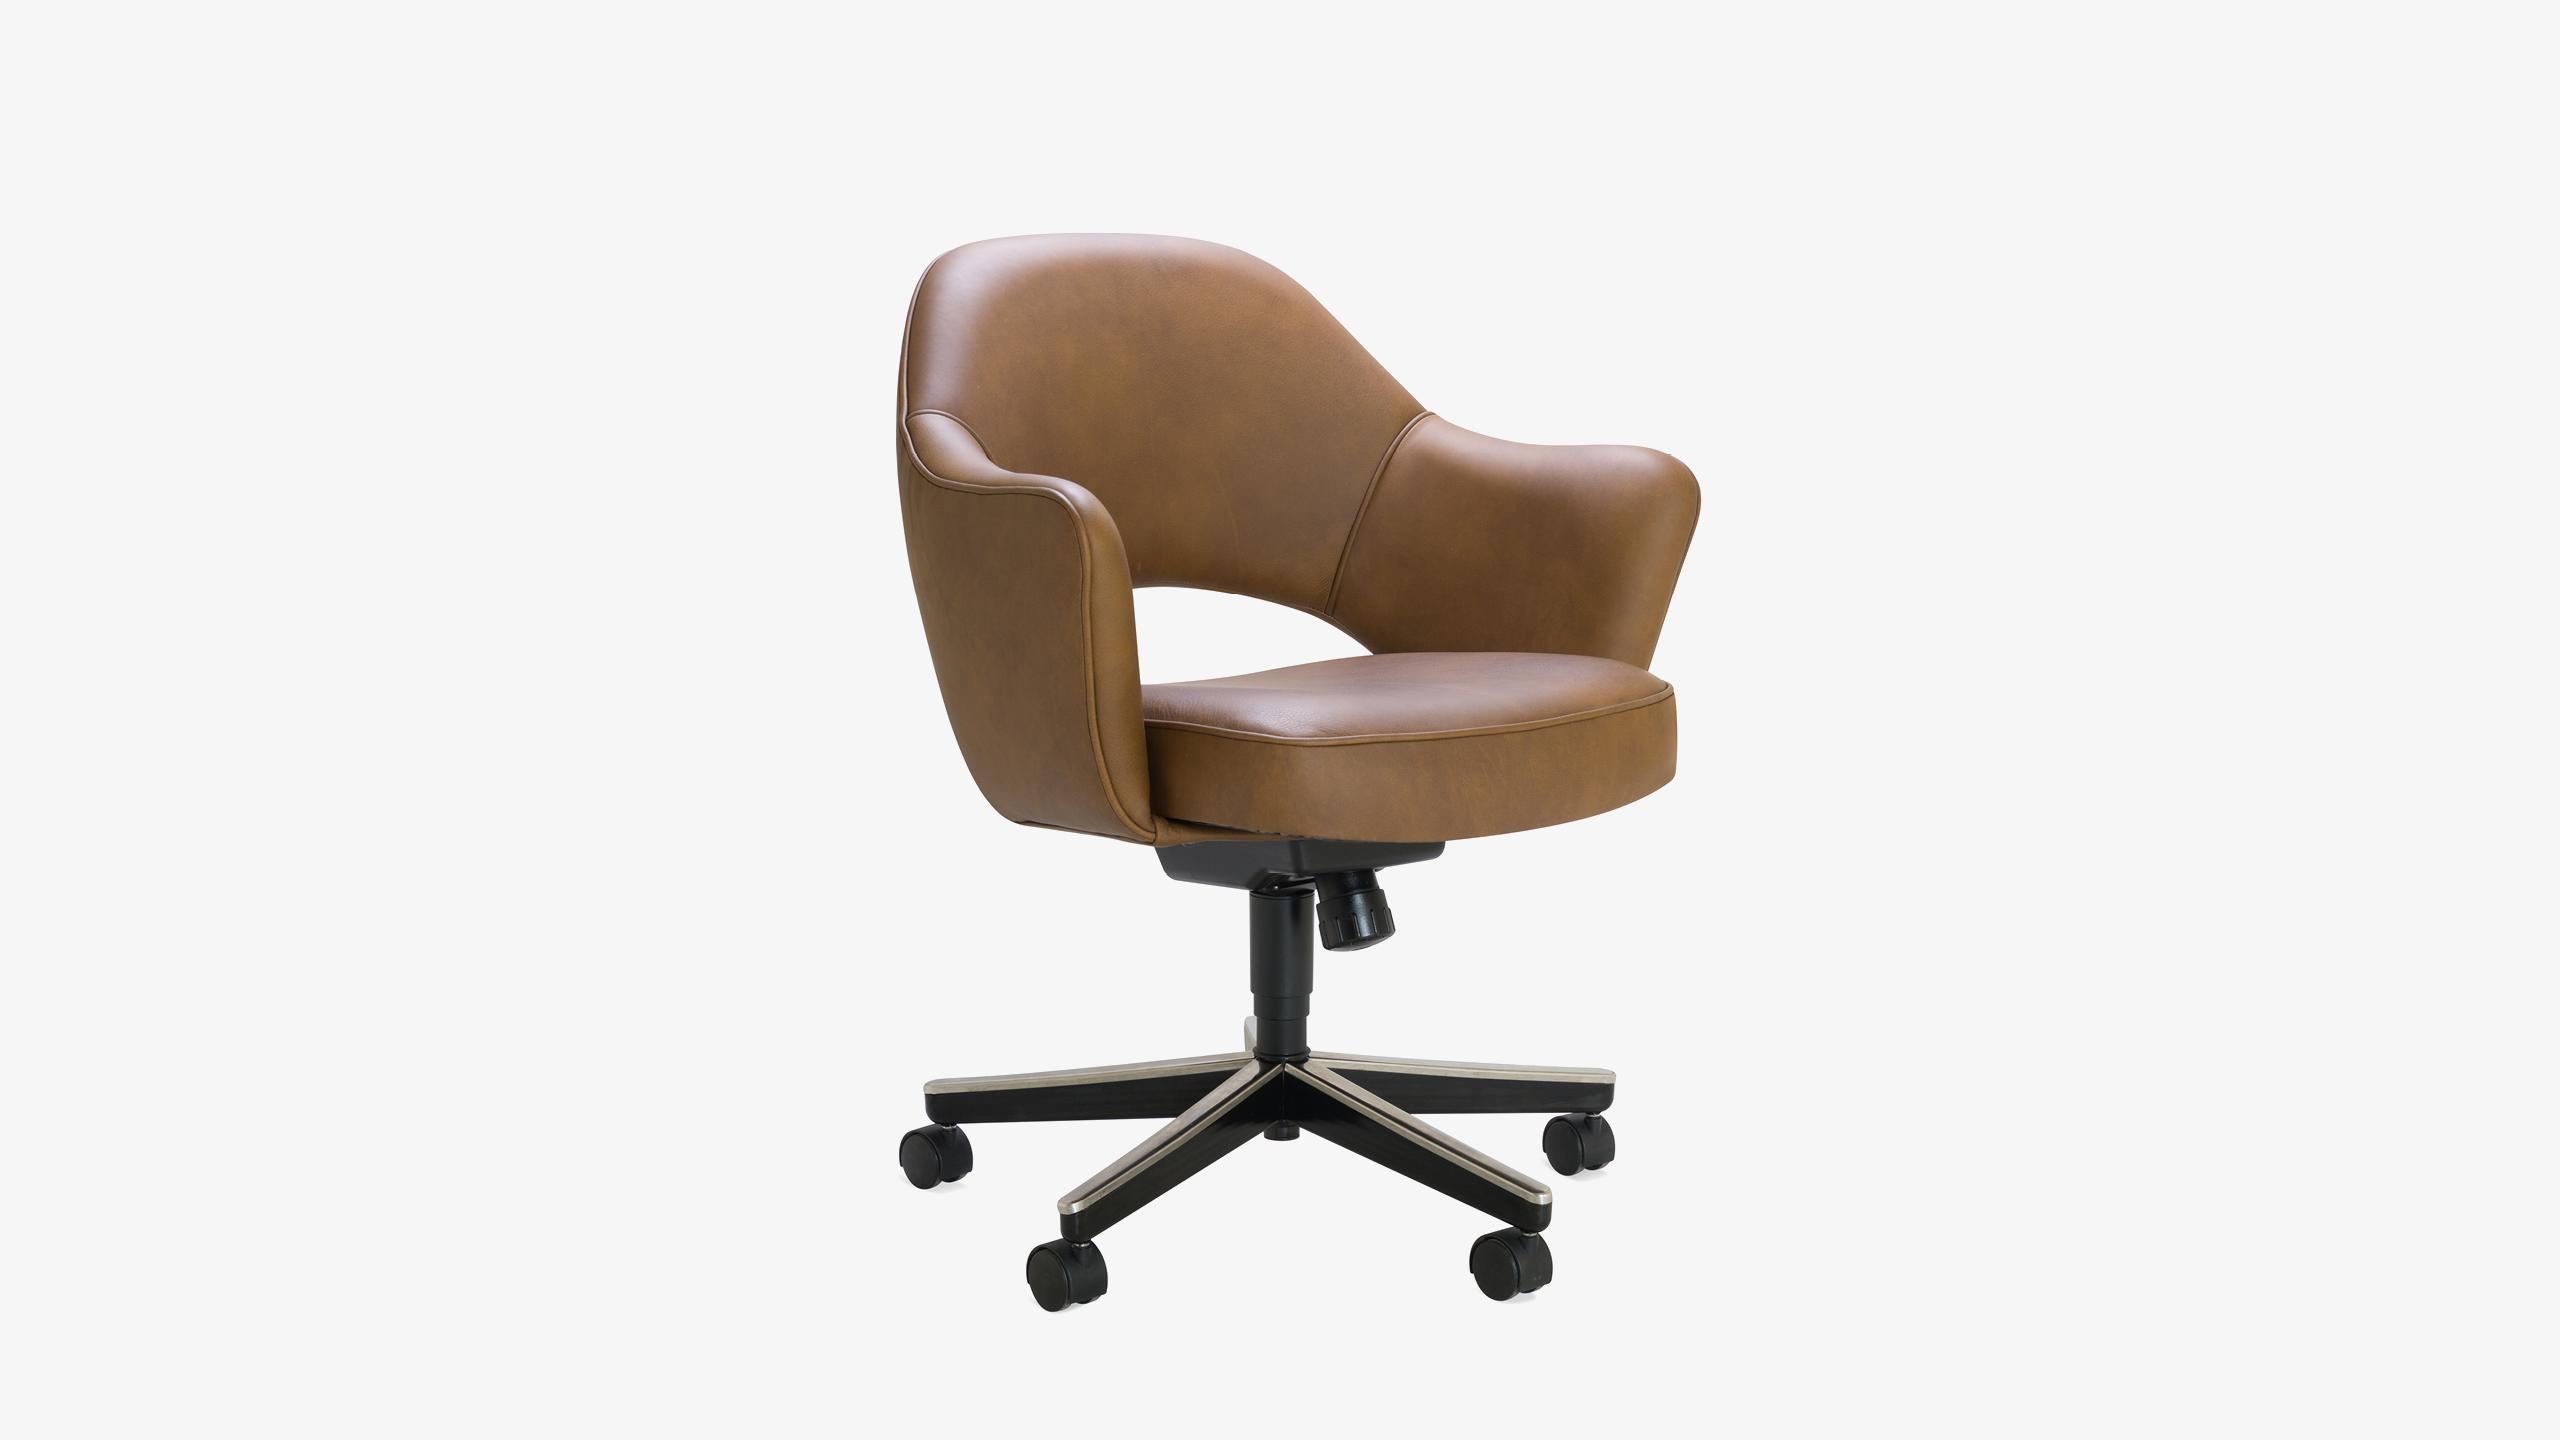 We have been restoring Saarinen executive chairs for years in every fabric one can imagine, right in our very own workroom. We’ve restored these chairs using a supple Italian Leather in Saddle. Please inquire about the possibilities of our Workroom